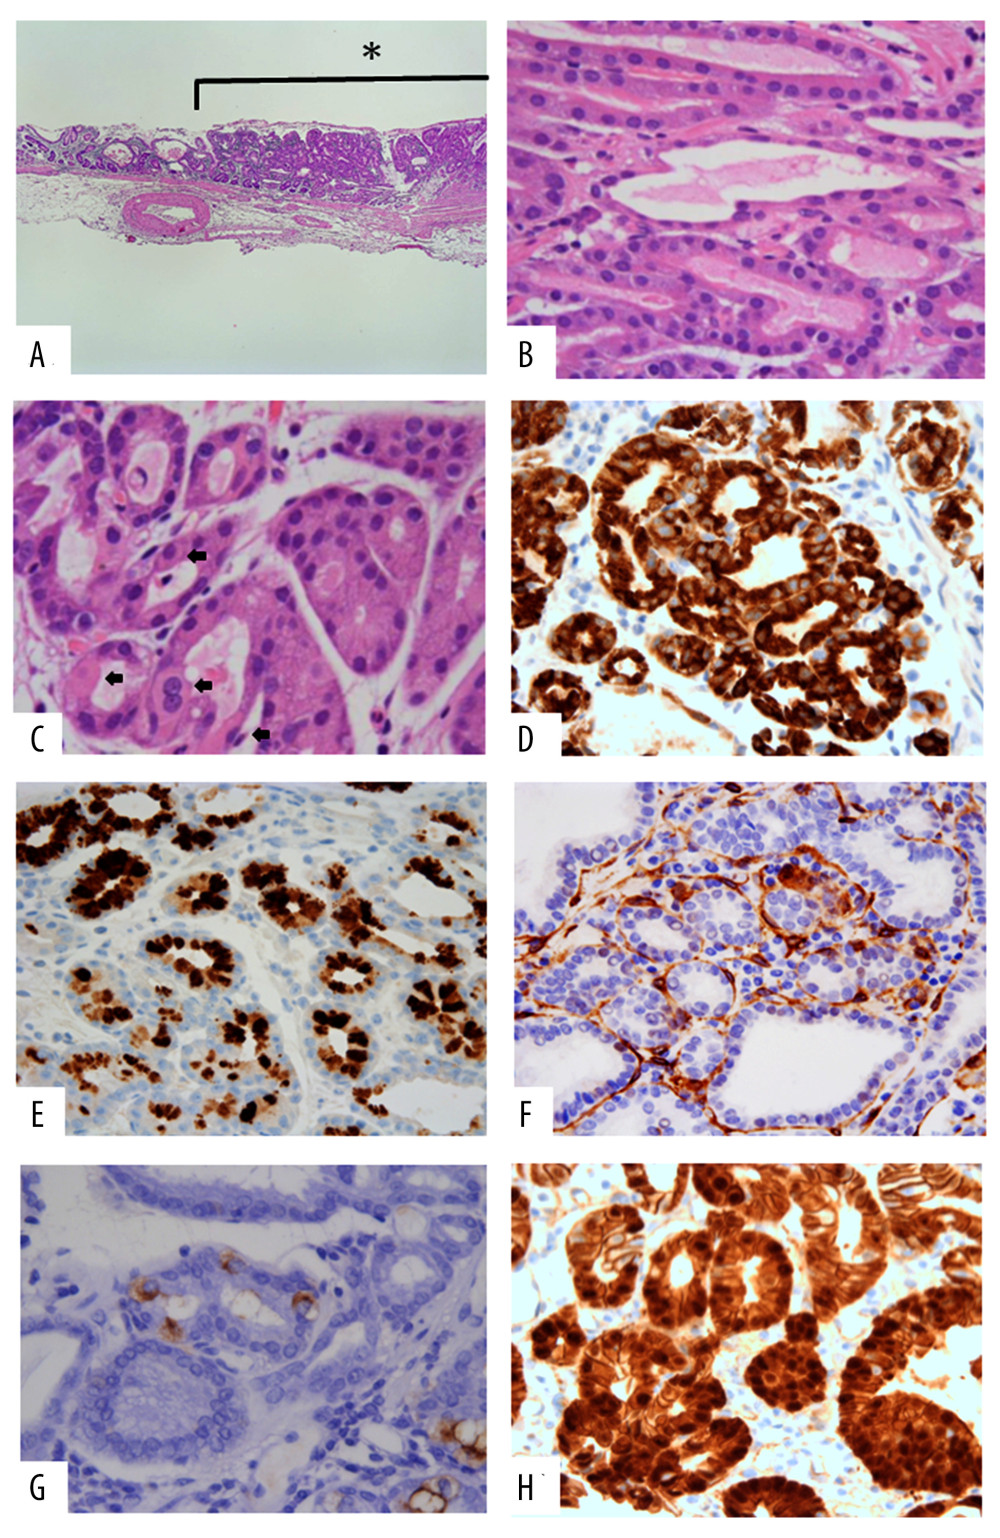 At low magnification, a gastric adenocarcinoma of the fundic gland type (GAFG) is located in the mucosa (A). The tumor consisted of clustered tumor cells resembling chief cells and cystic glands (B). At high magnification, it is clear that the tumor contains chief cells and parietal cells ➙ (C). Immunohistochemically, the tumors are positive for MUC6 and pepsinogen-I in chief cells, H+/K+ ATPase and PDGFRα in parietal cells (D–G) and are focally strongly positive for β-catenin (H).